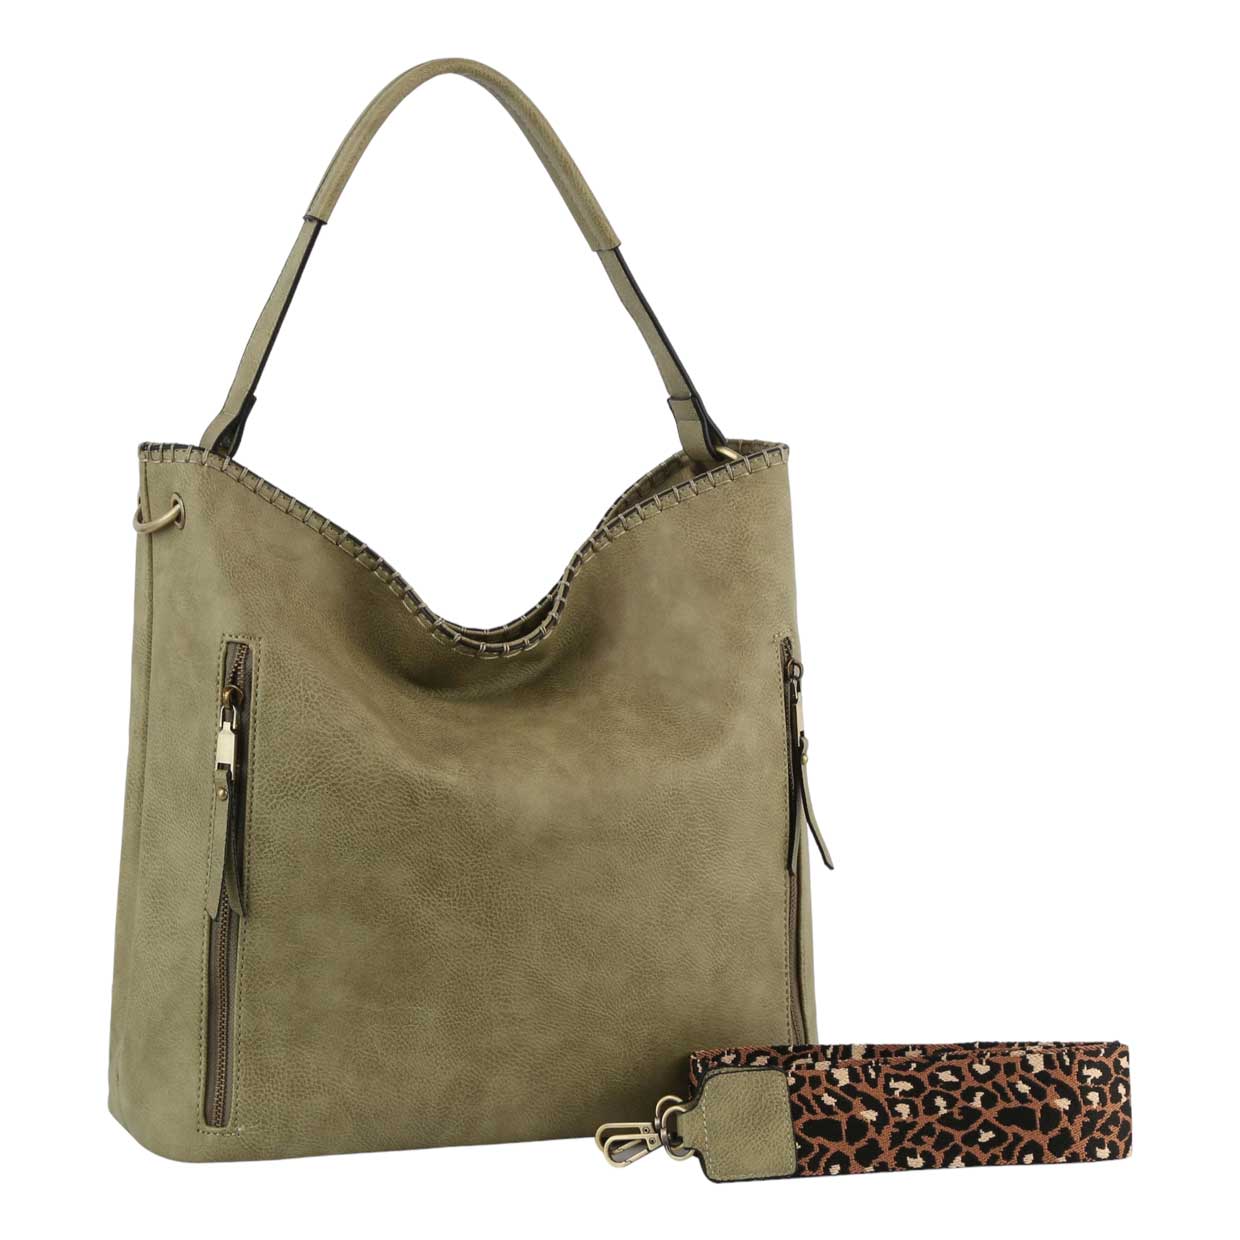 Sage Faux Leather Fashion Hobo Handbag with Guitar Strap, you can adjust according to your style can be used as crossbody. Look like the ultimate fashionista with these Hobo Handbag! Add something special to your outfit! This fashionable bag will be your new favorite accessory. Perfect Birthday Gift, Anniversary Gift, Mother's Day Gift, Graduation Gift, Valentine's Day Gift.